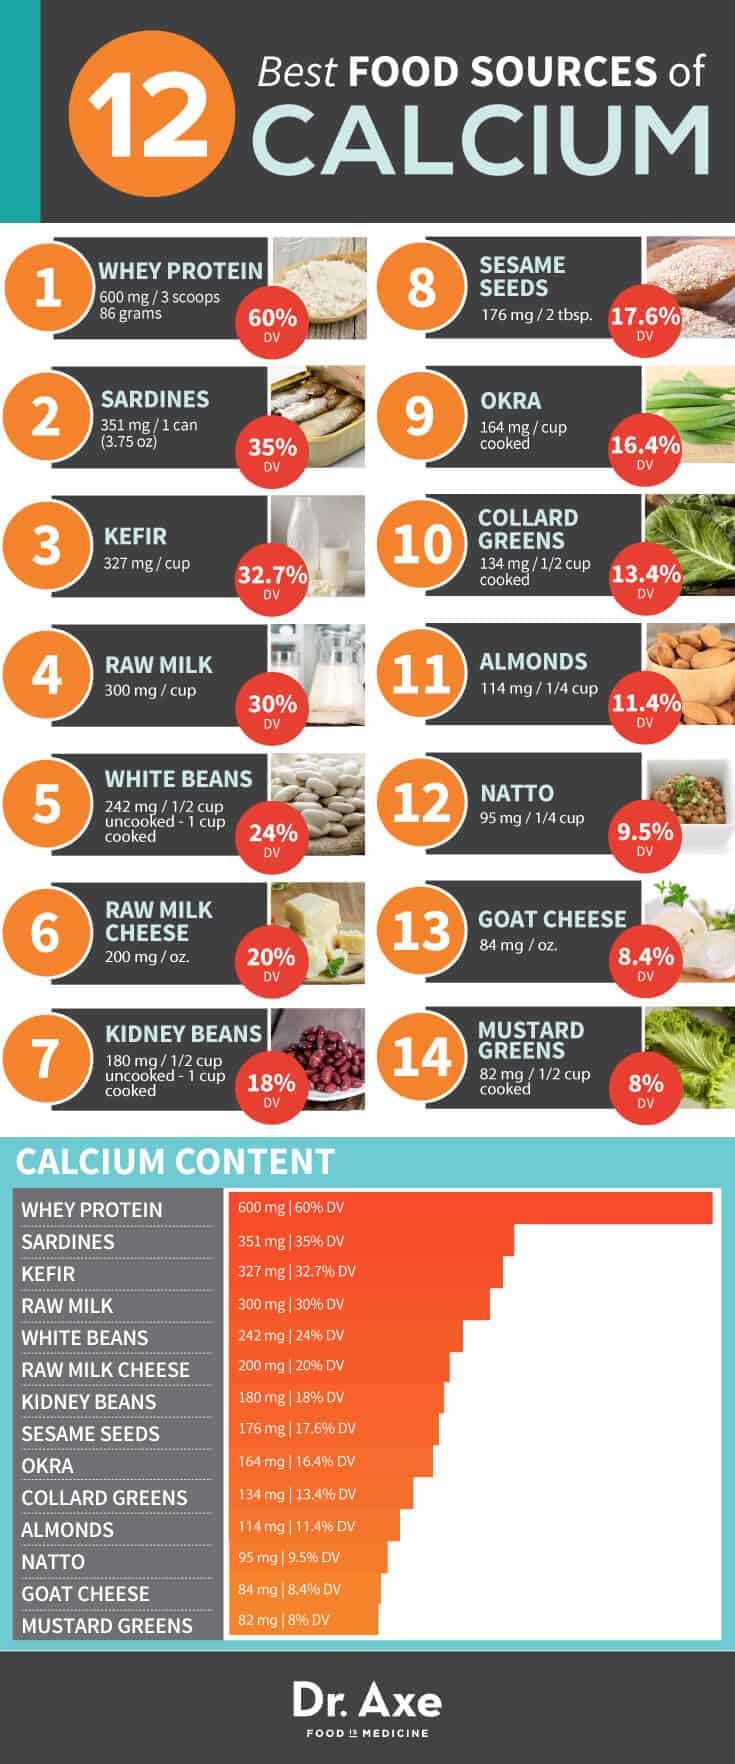 Calcium Deficiency Are Supplements the Answer?